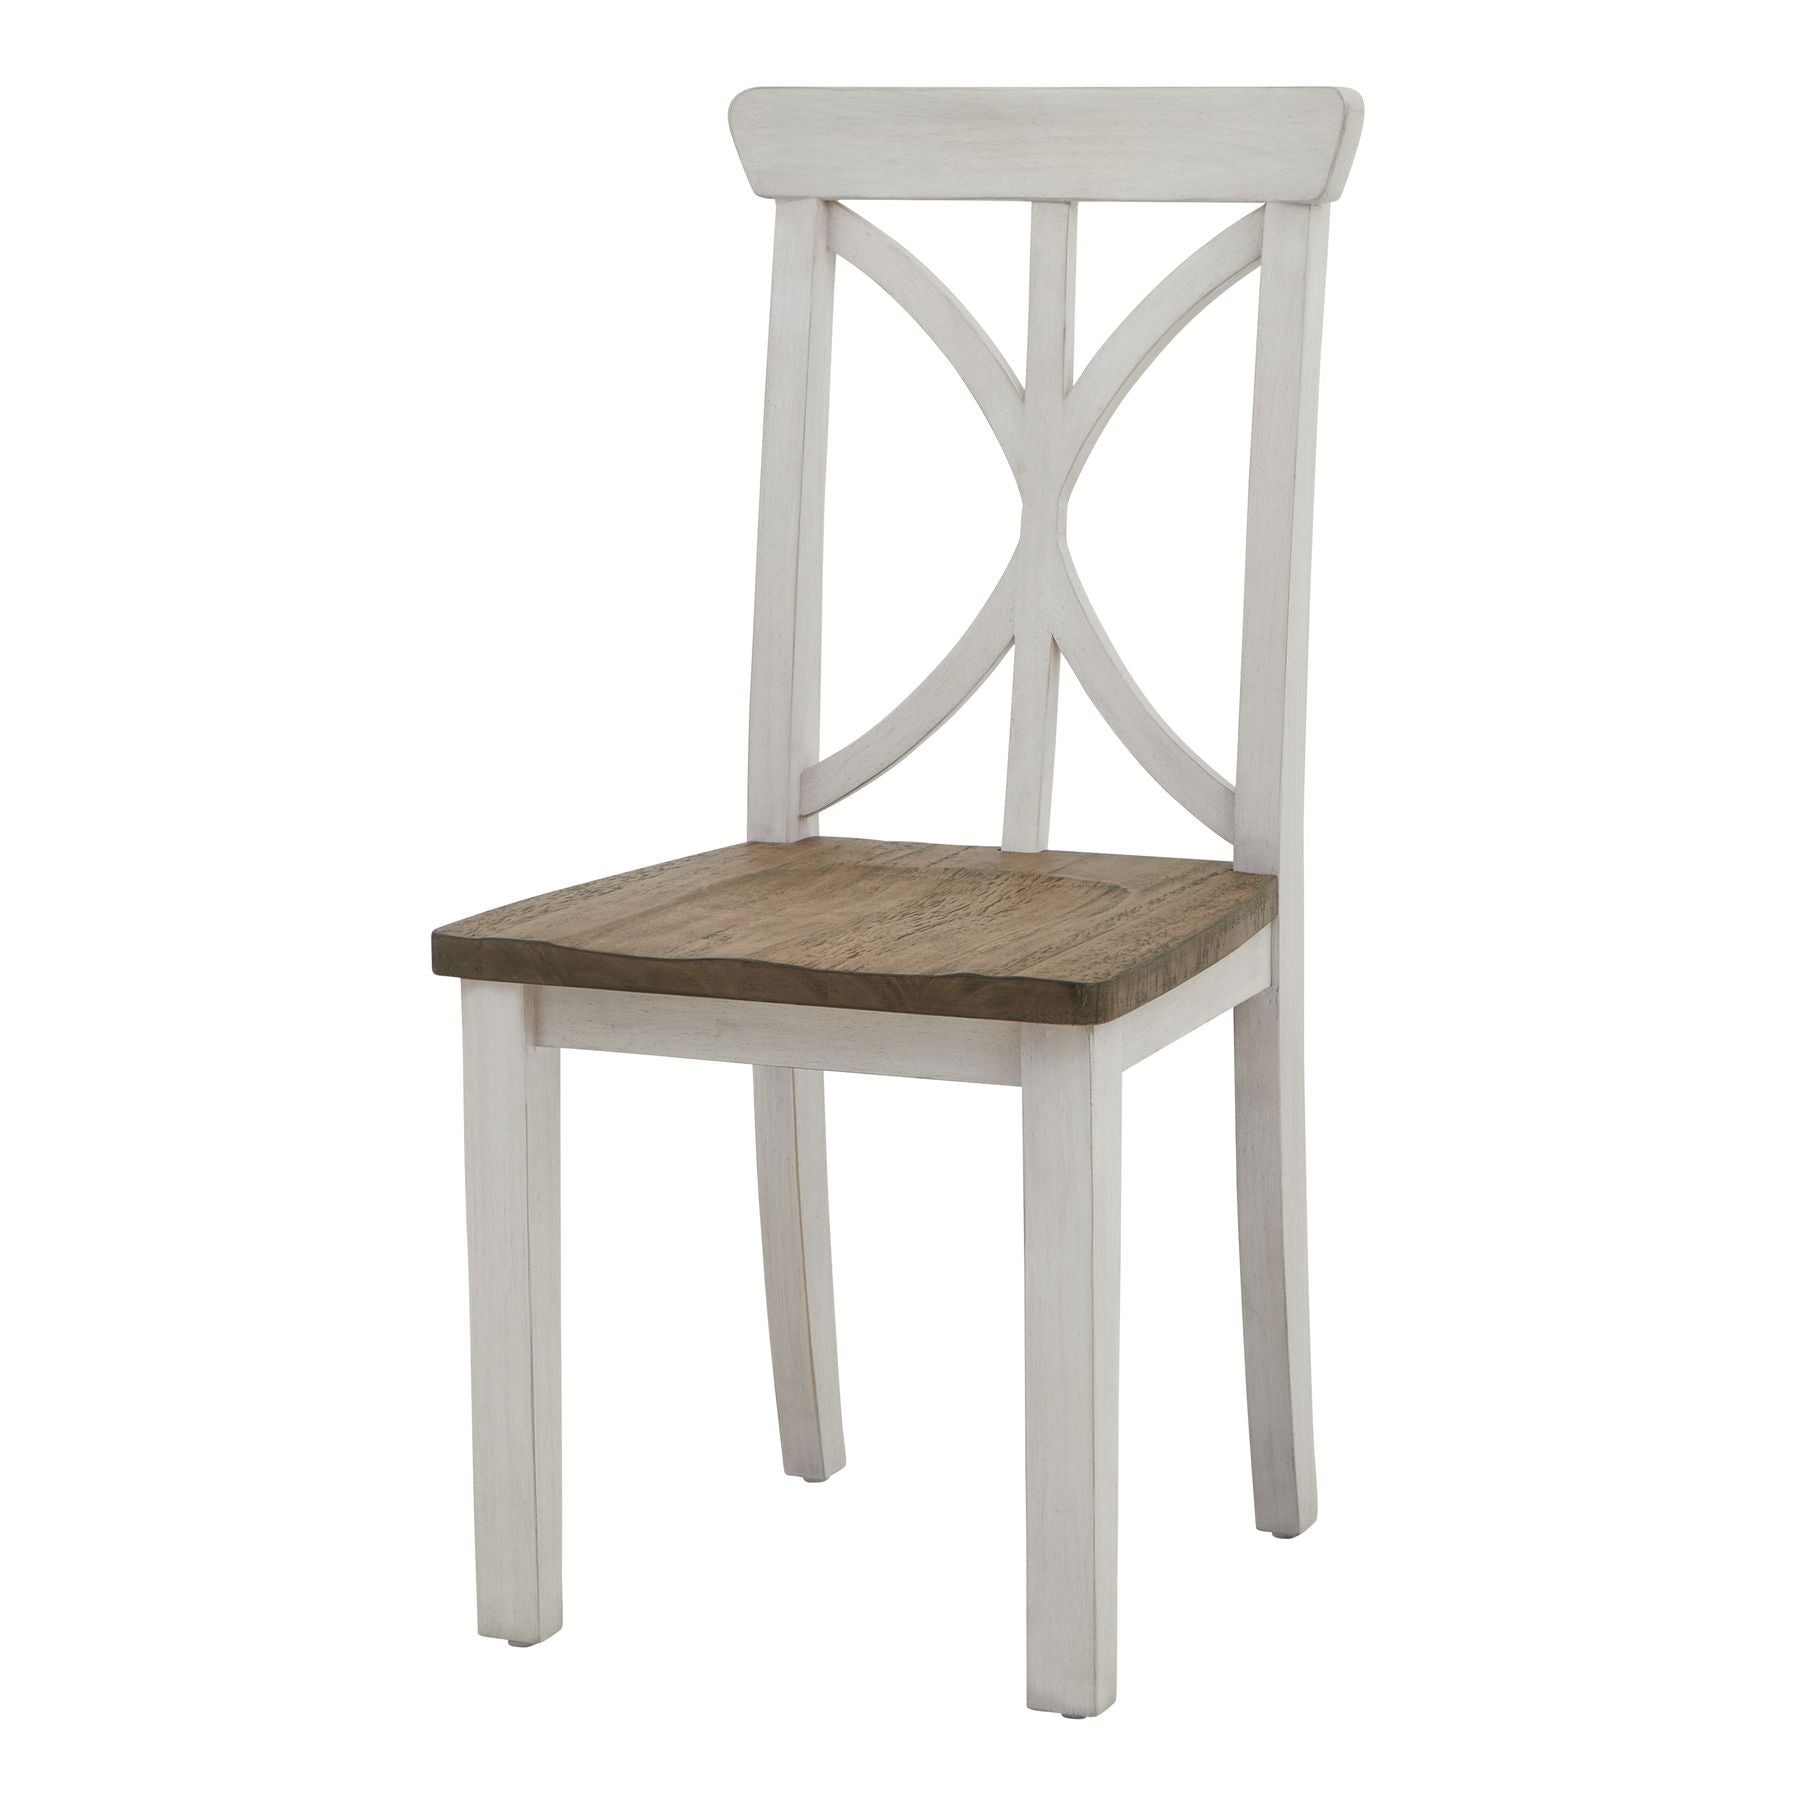 View Luna Collection Dining Chair information